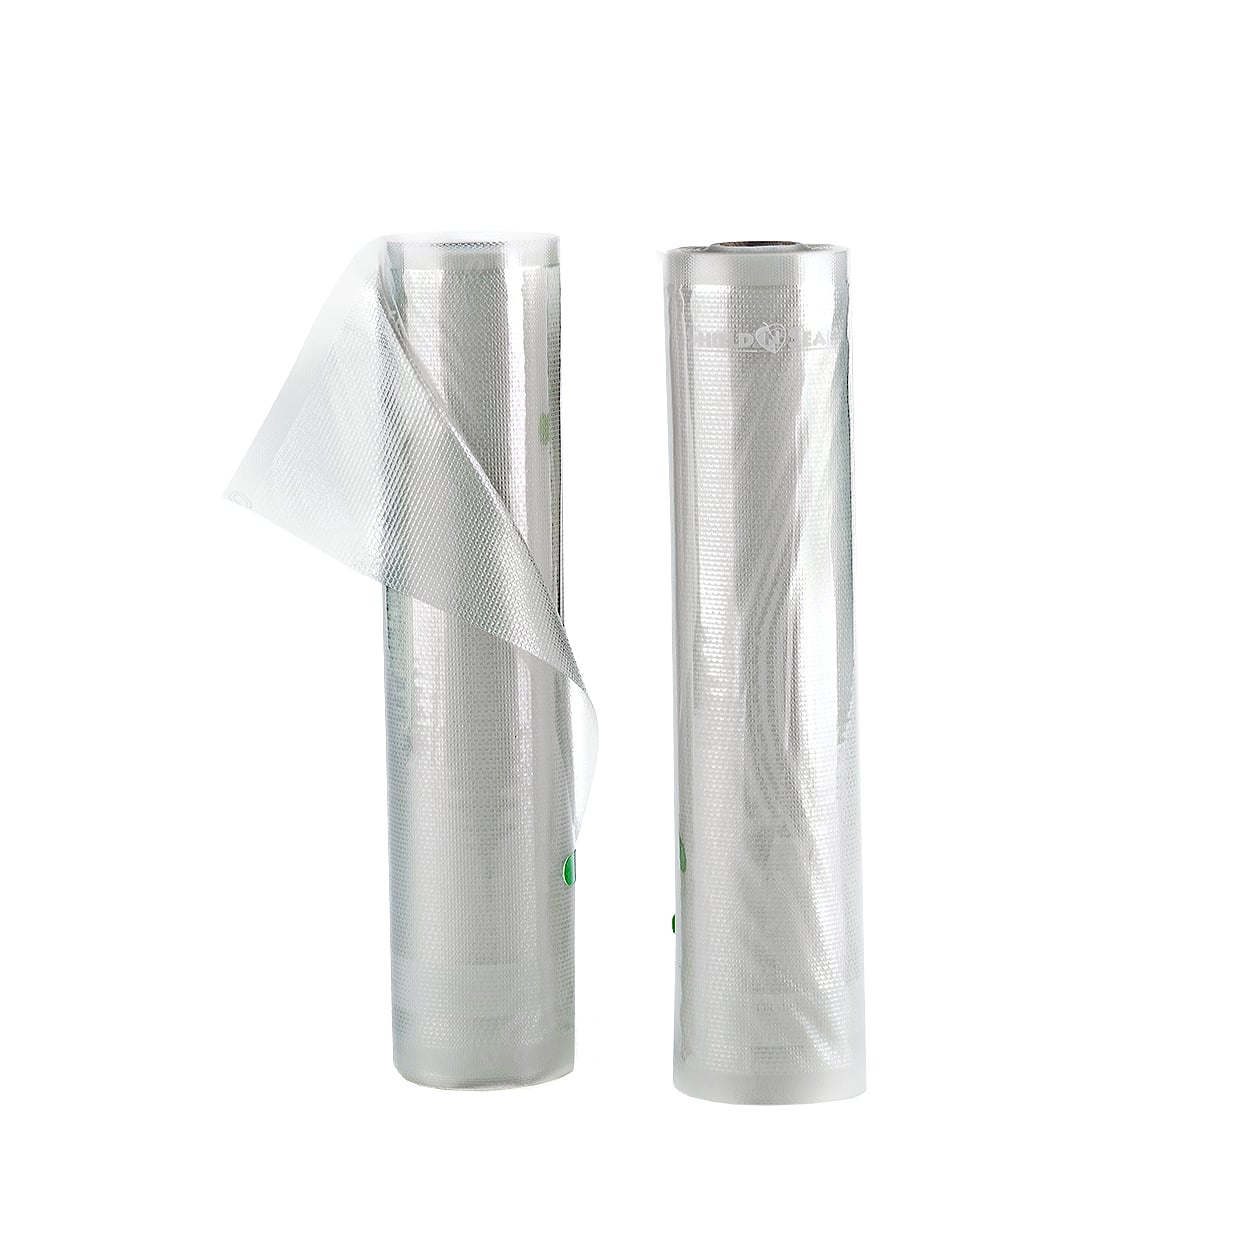 11″ x 19.5 All Clear Vacuum Sealer Rolls (15 Boxes)